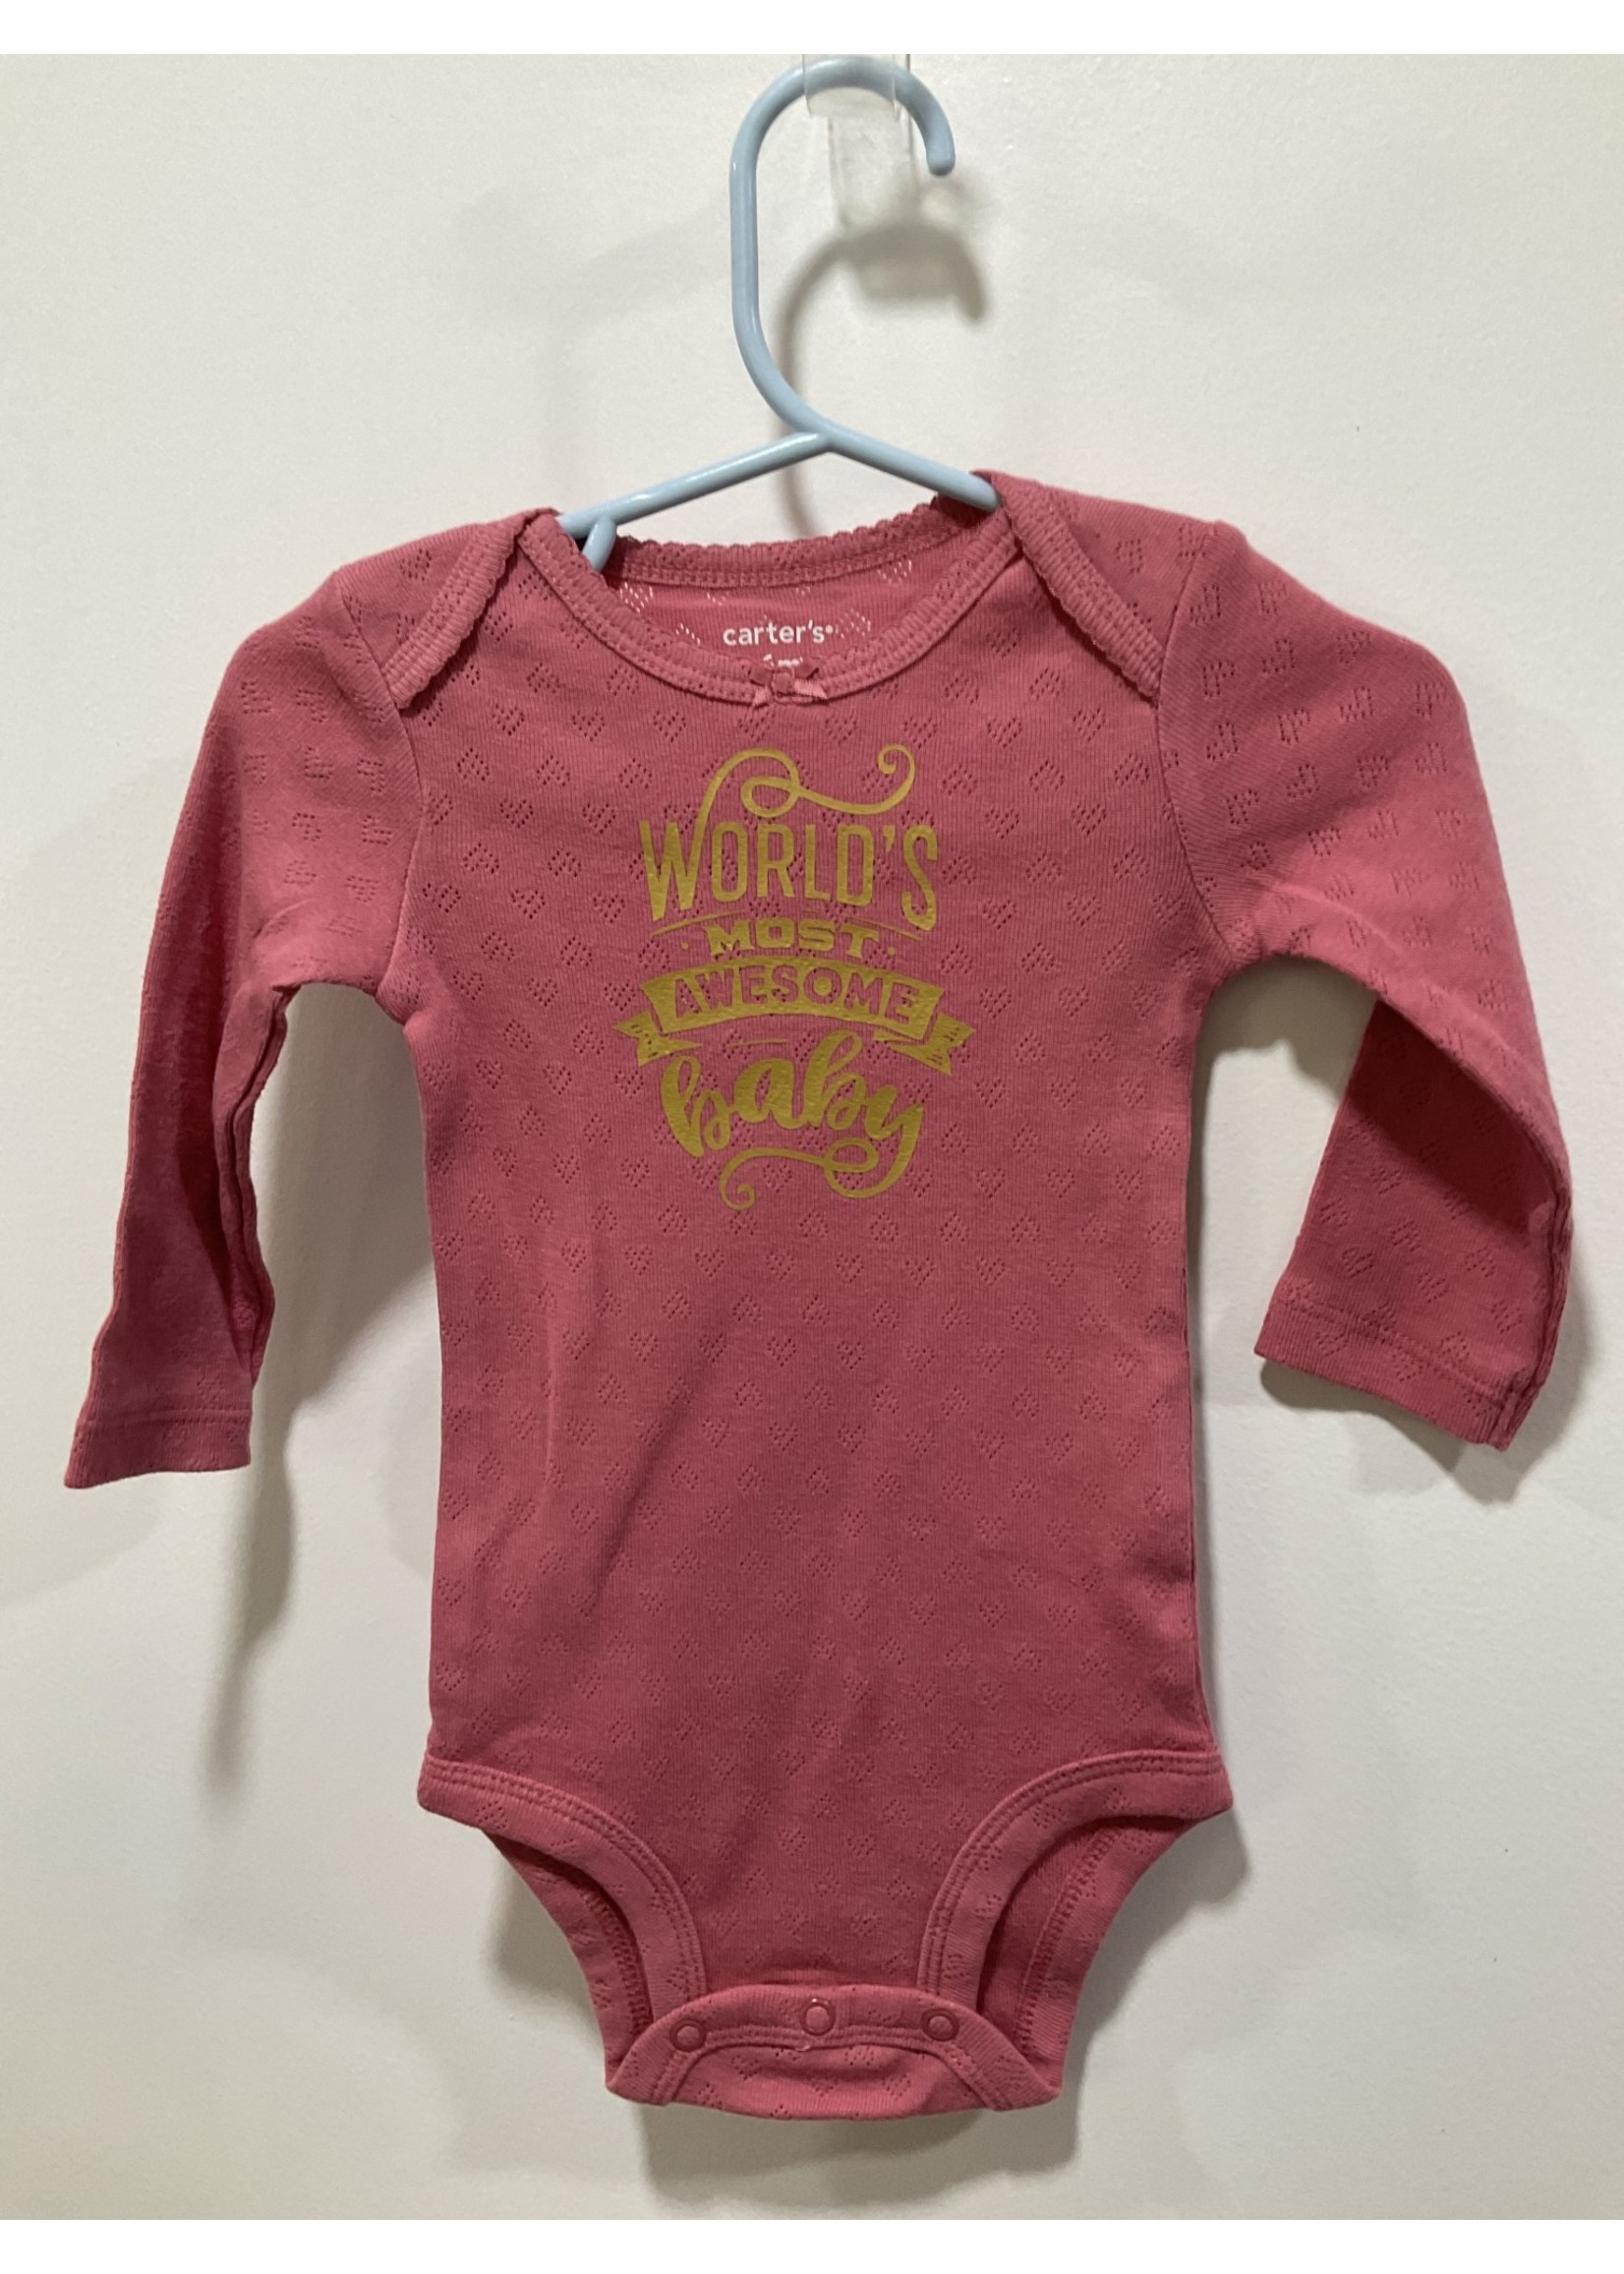 My New Favorite Thing Onsie Dark Pink w/Gold "World's Most Awesome Baby" long sleeve 6 month